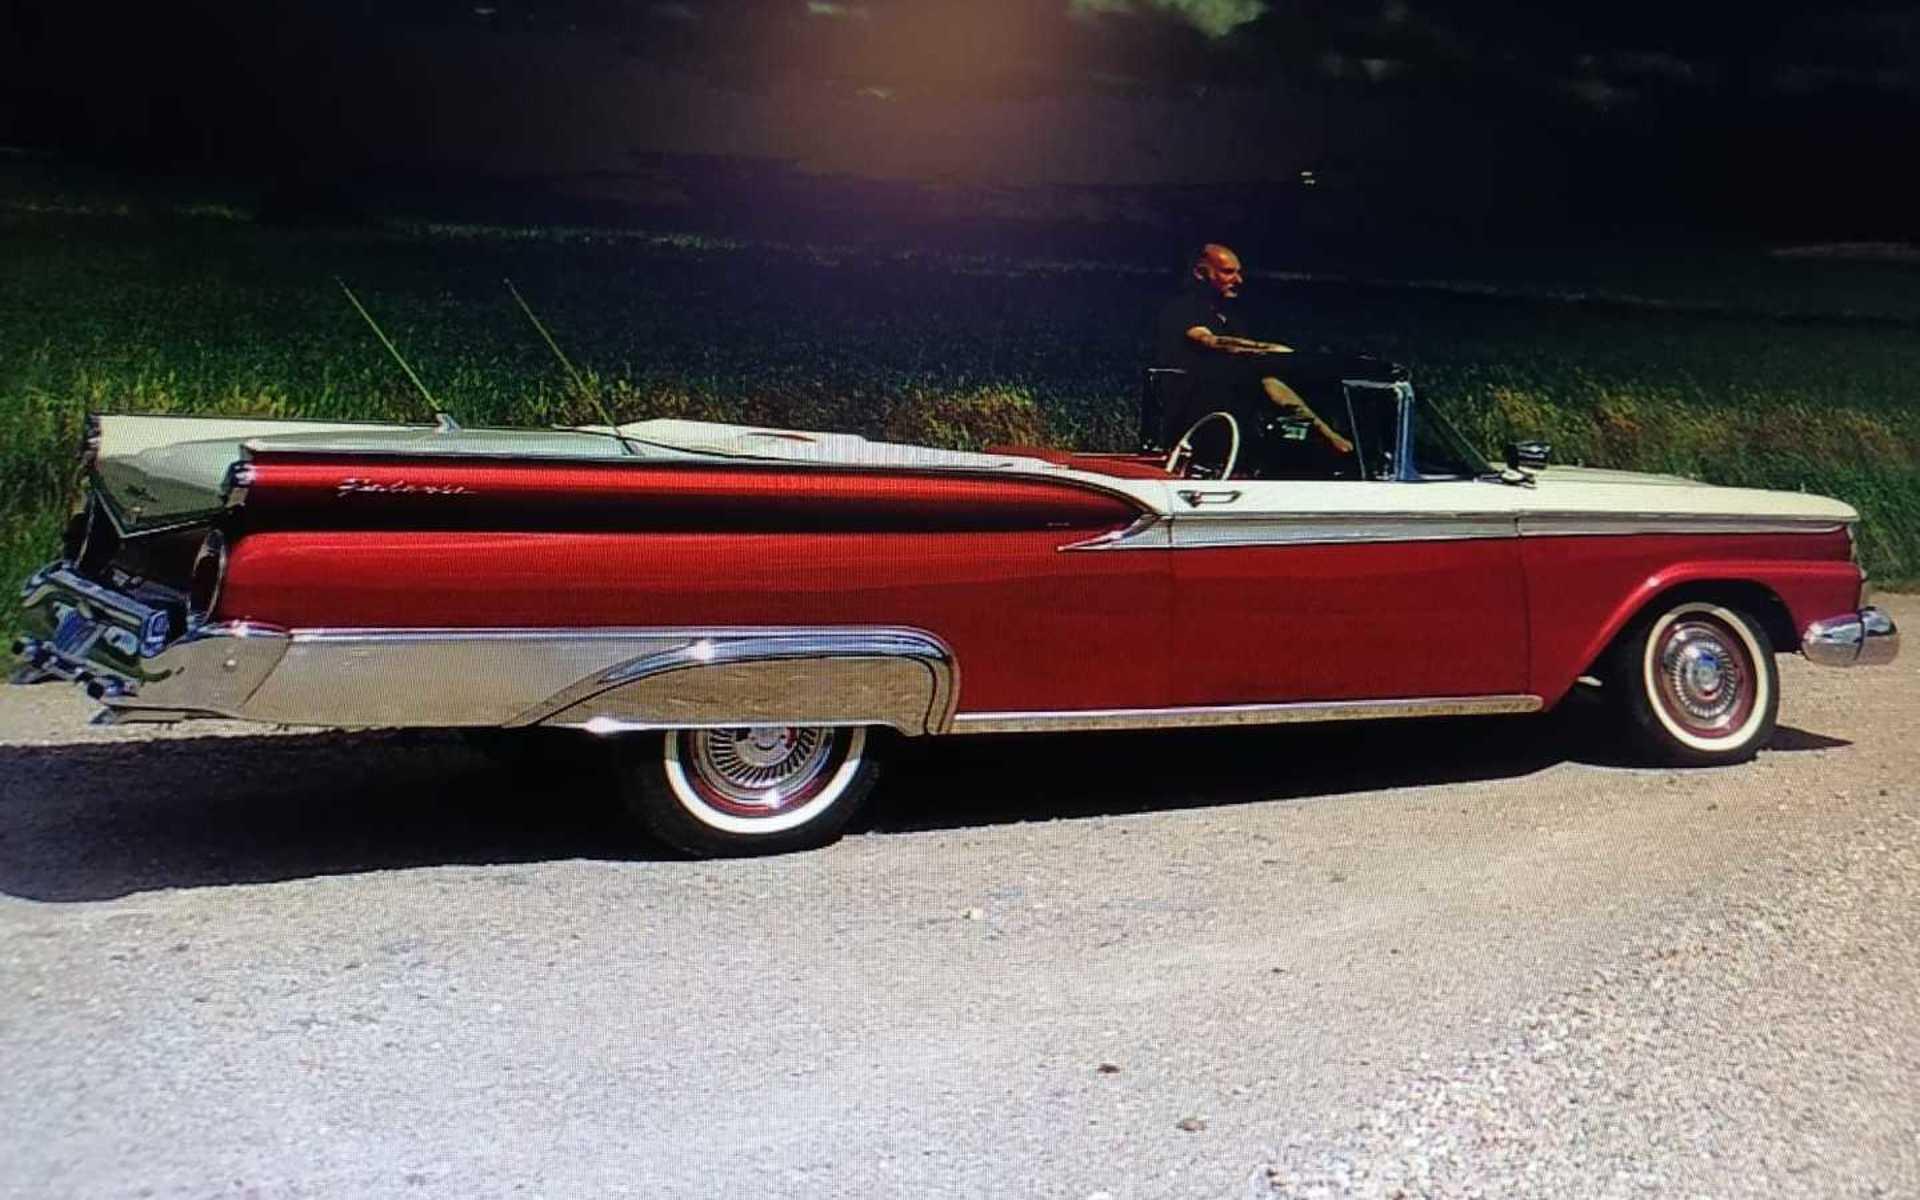 ”Ford Galaxie sunliner 1959”